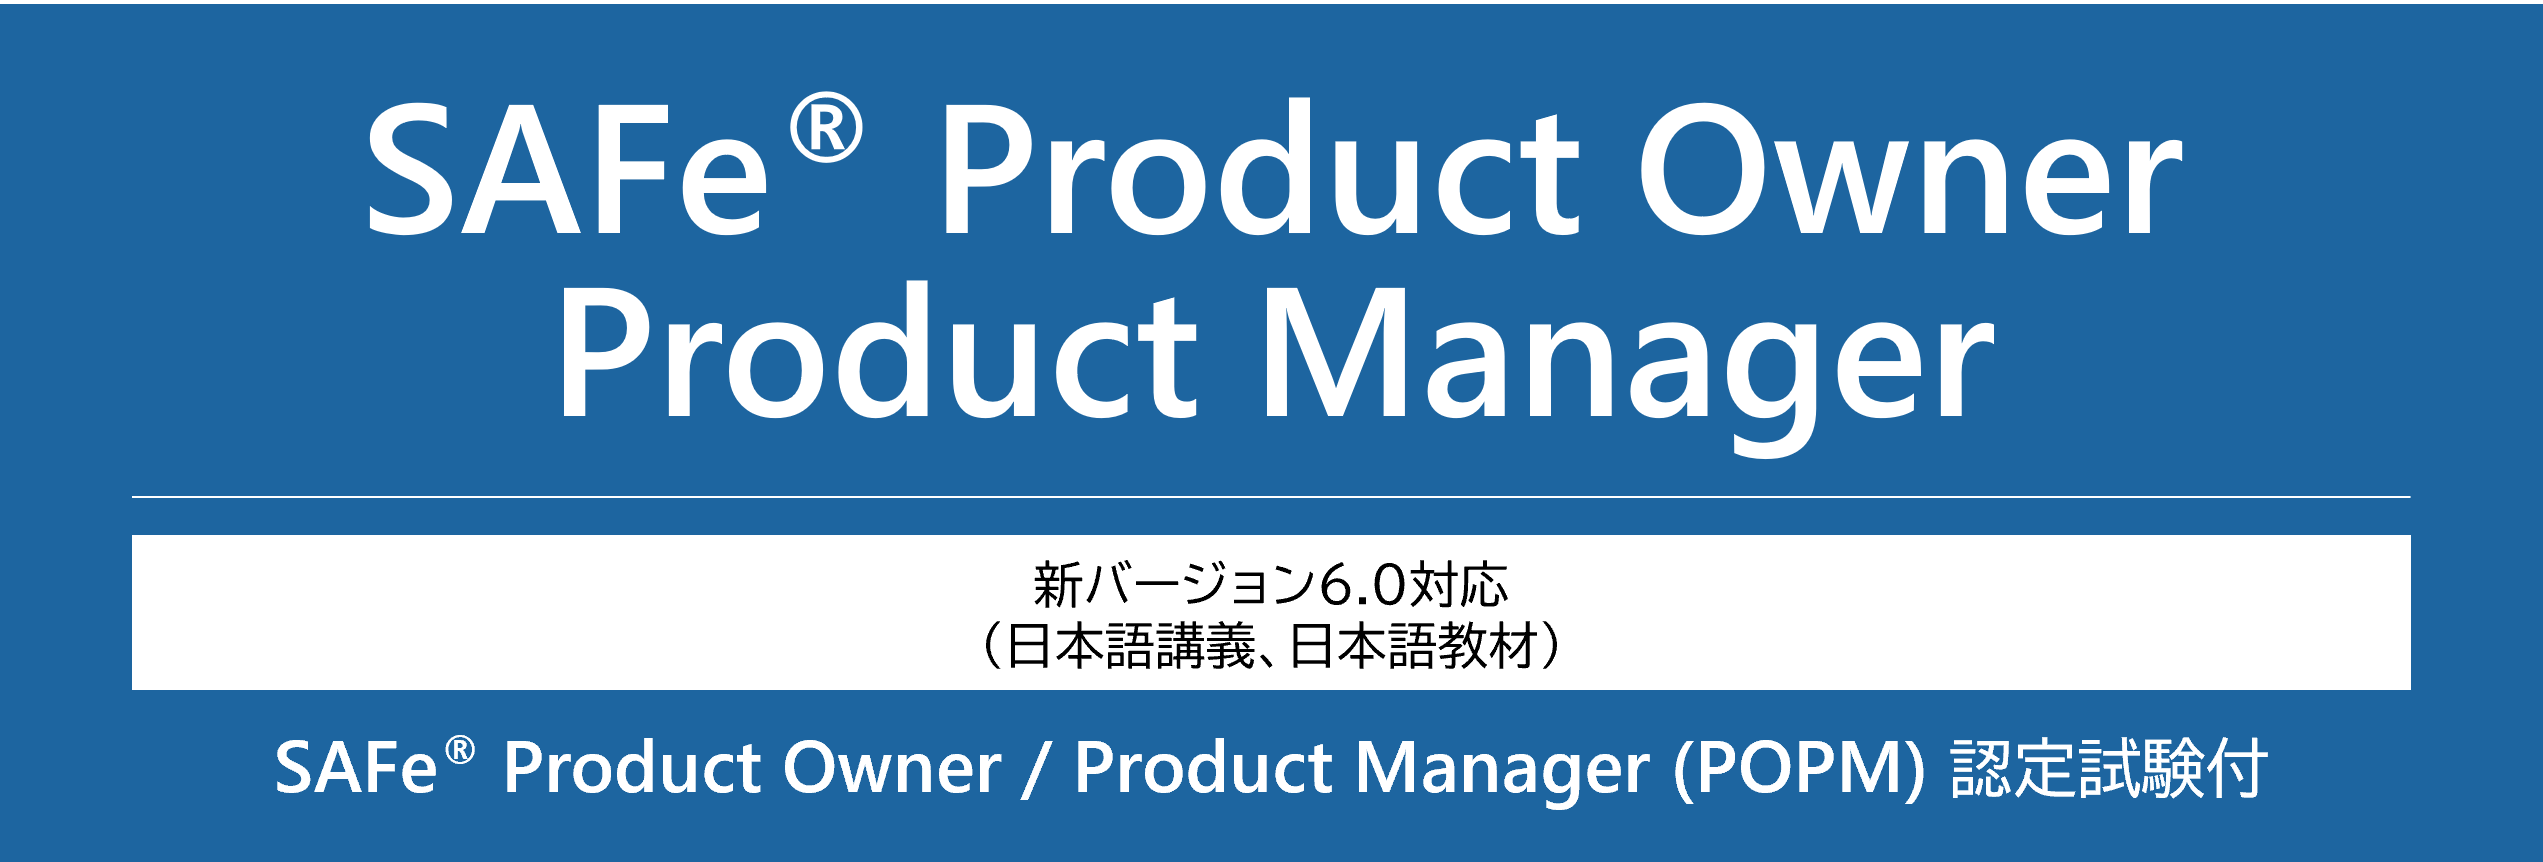 SAFe Product Owner / Product Manager